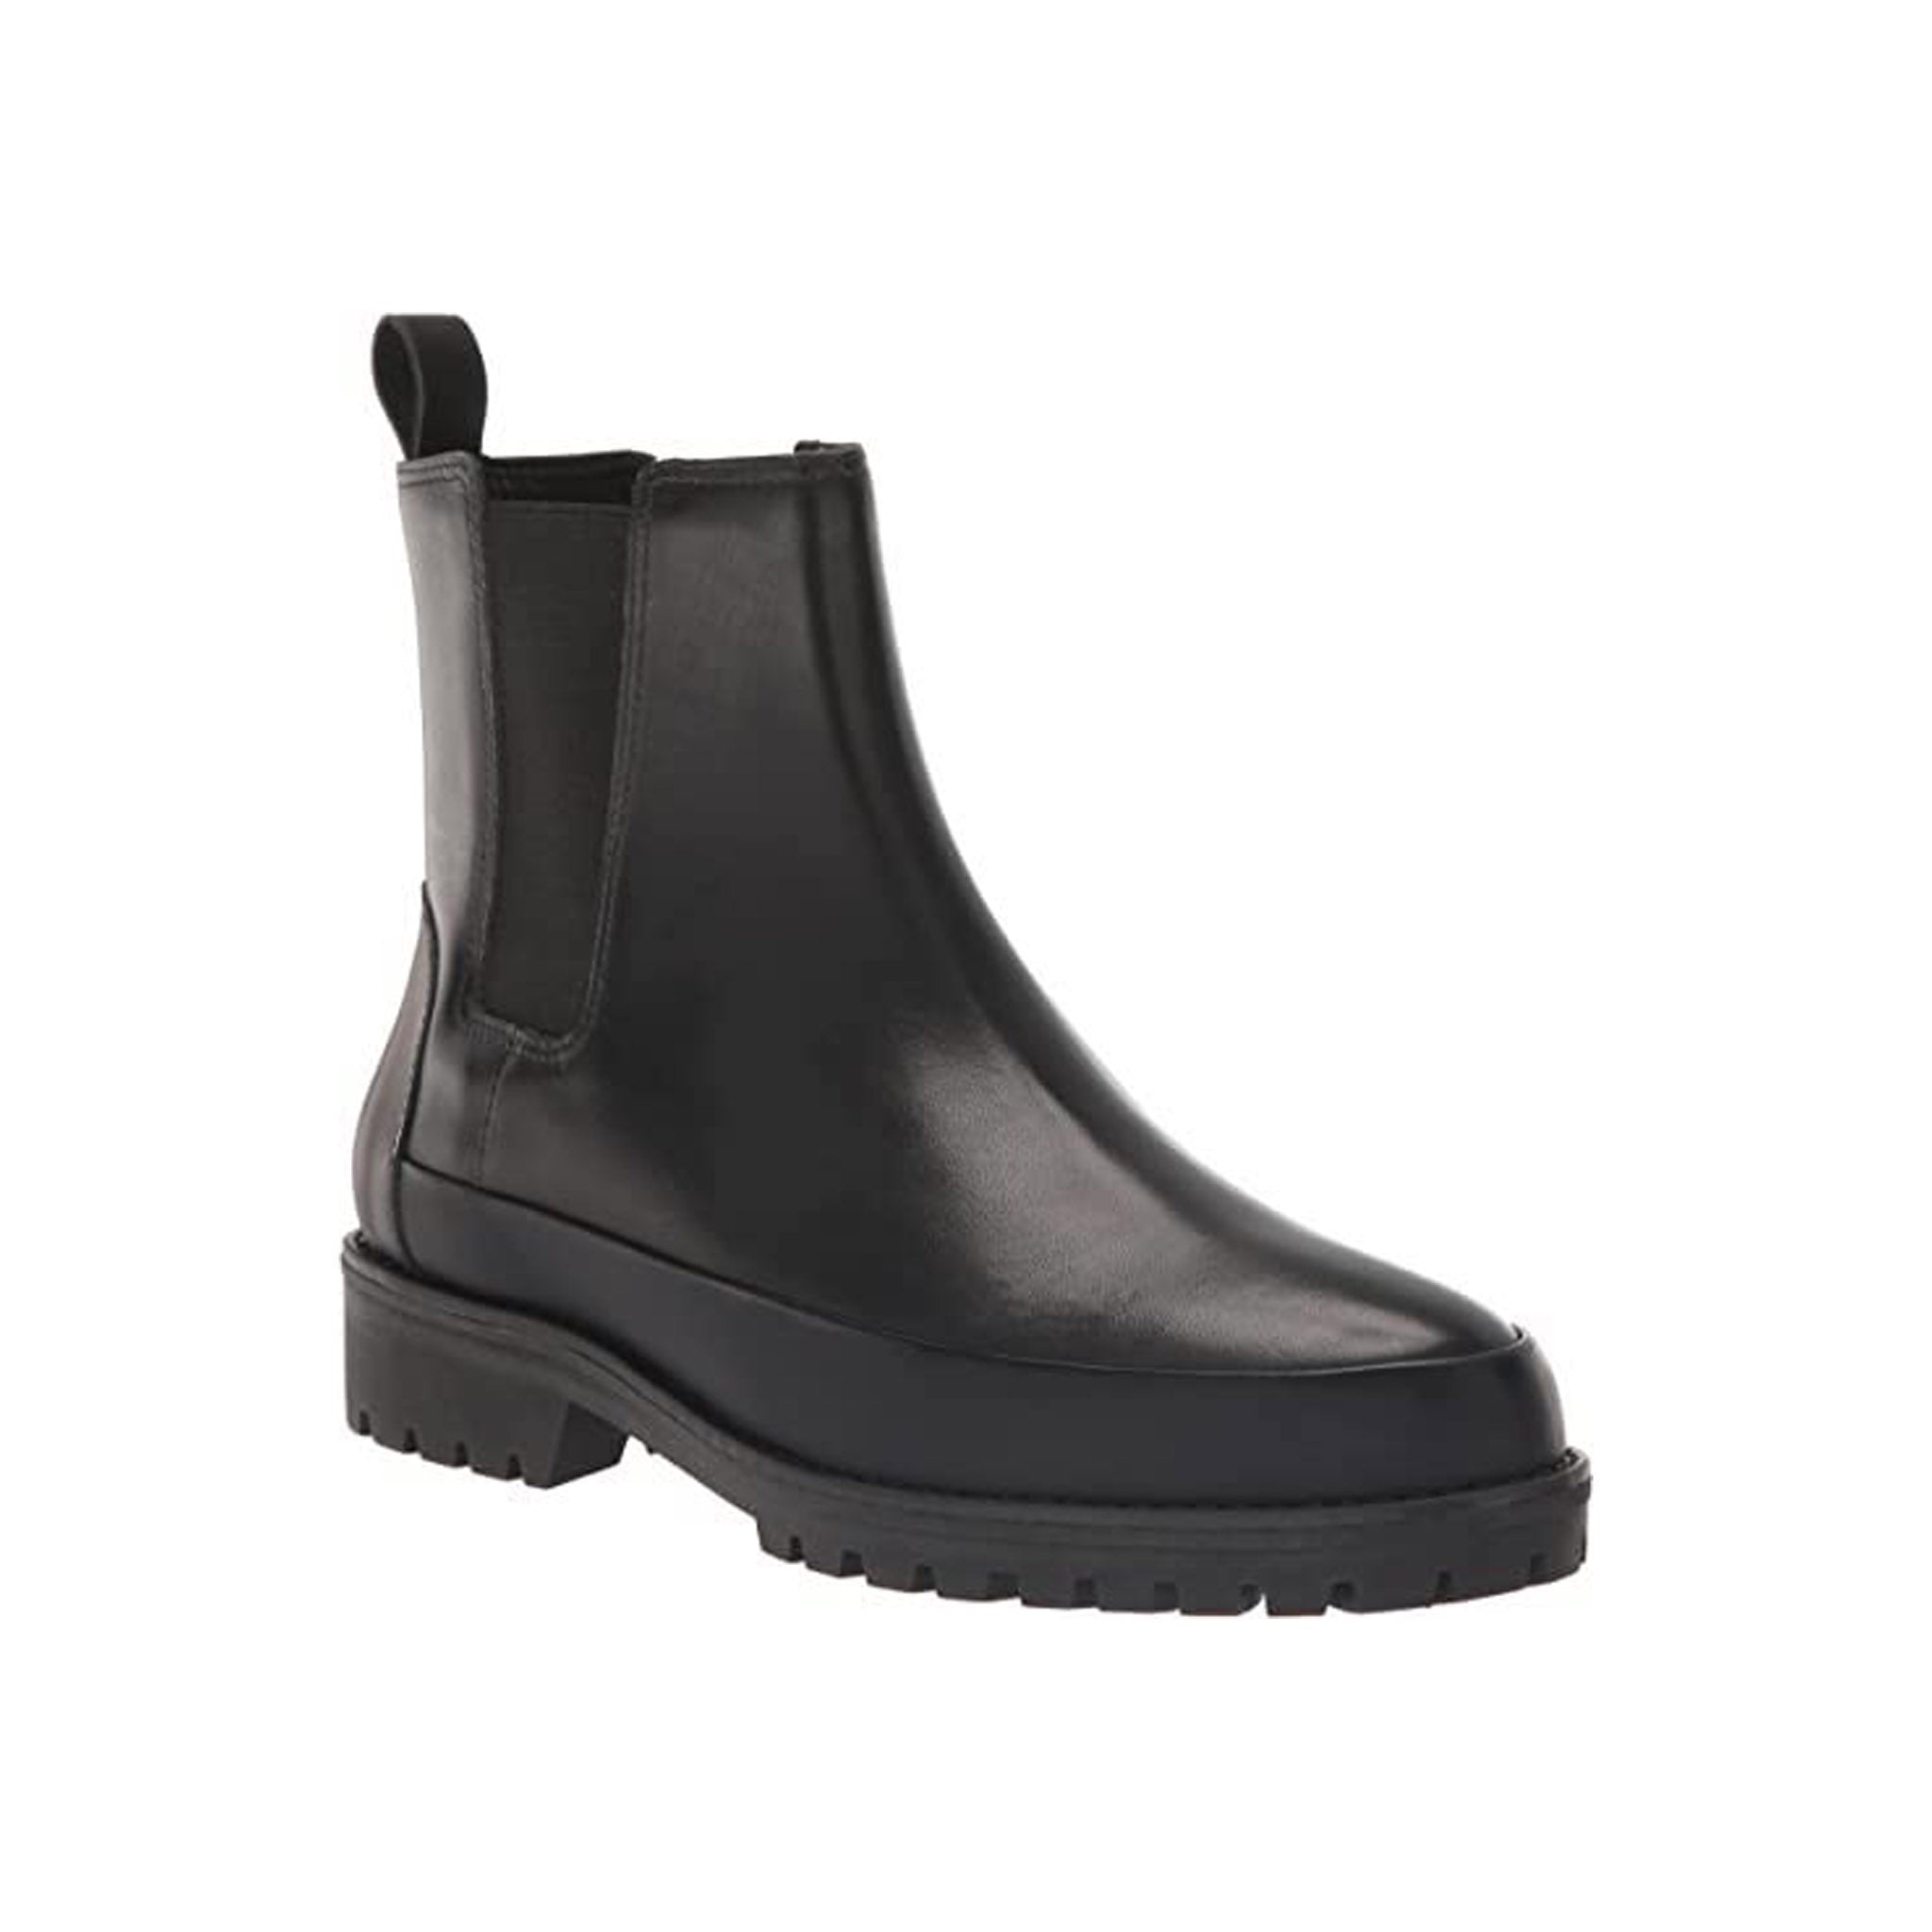 The All Weather Boot, Black